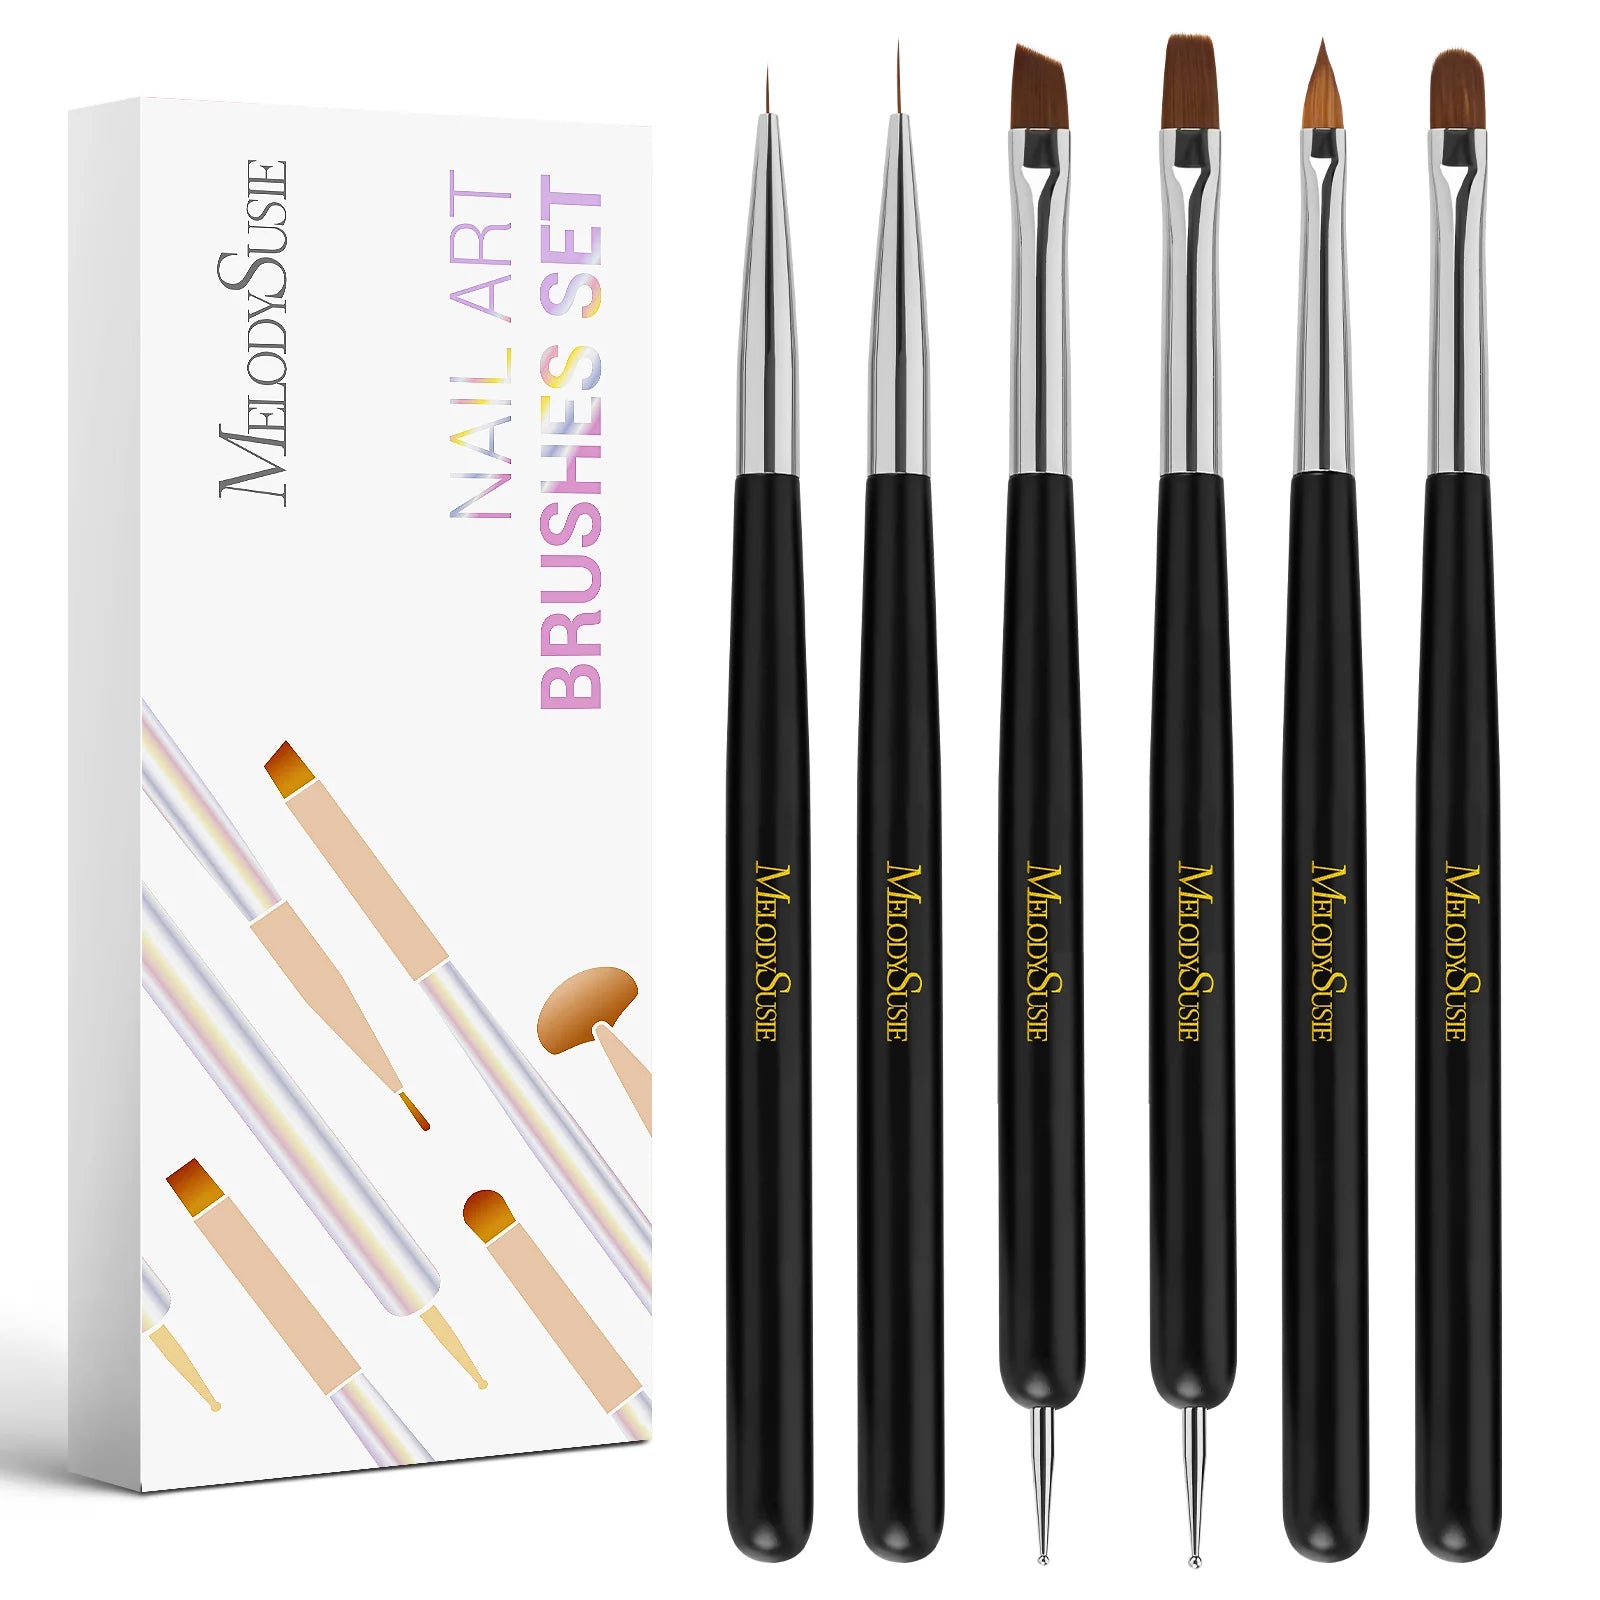 Brush Up on Your Nail Game with Mylee's New Nail Art Brushes – Mylee